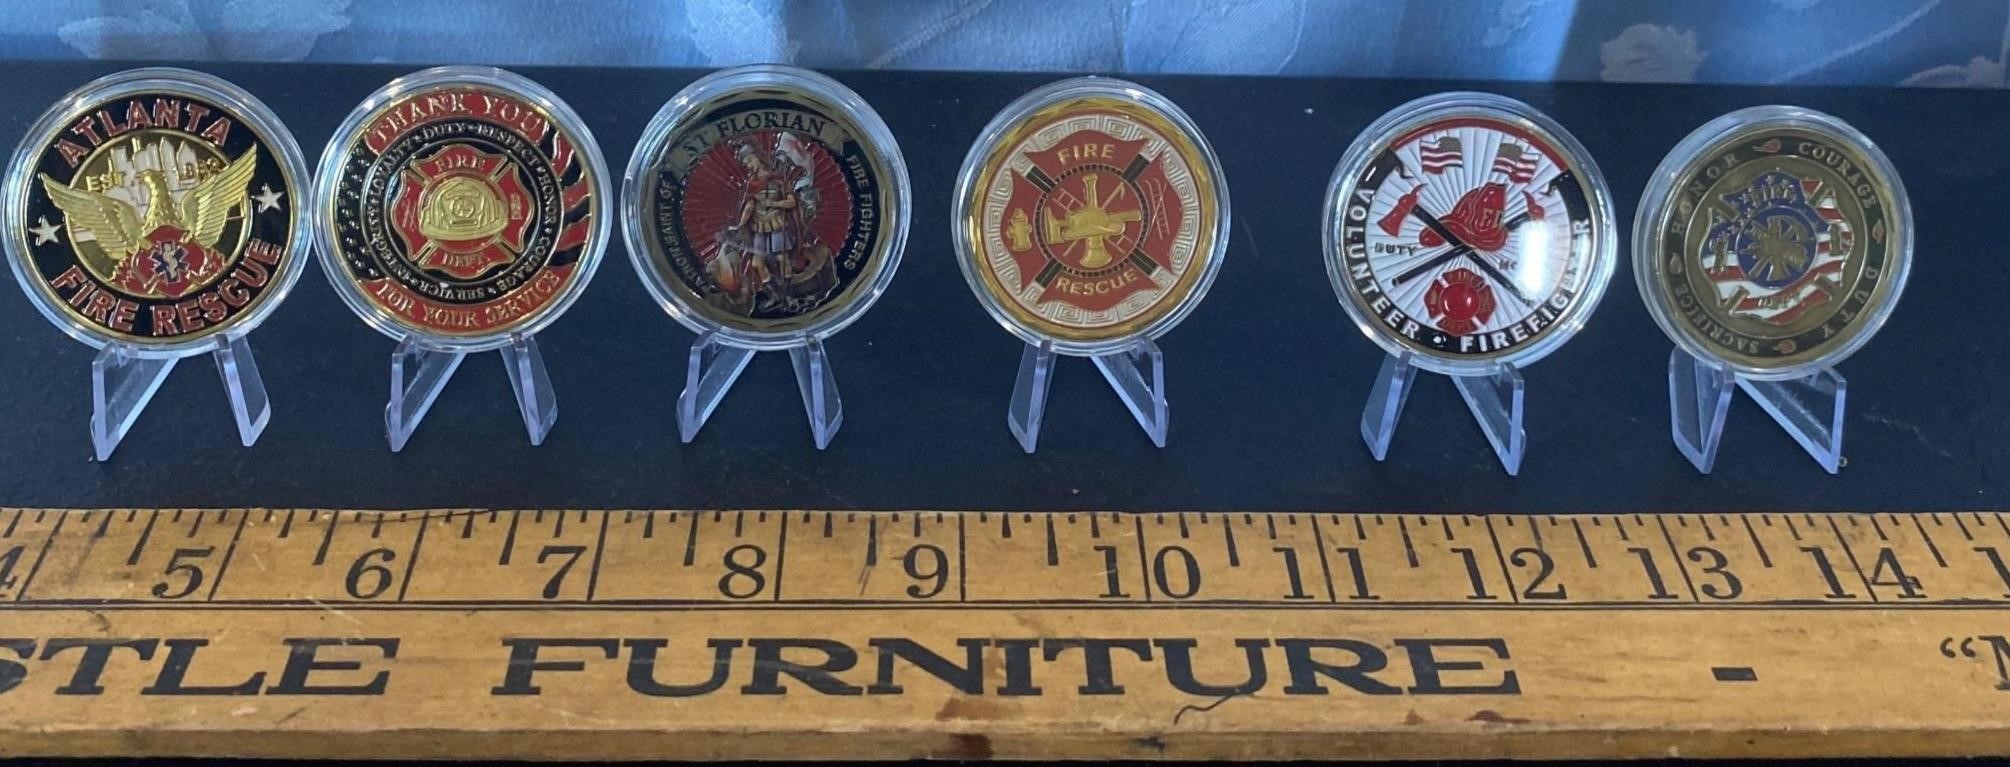 Fire Department Tribute Coins